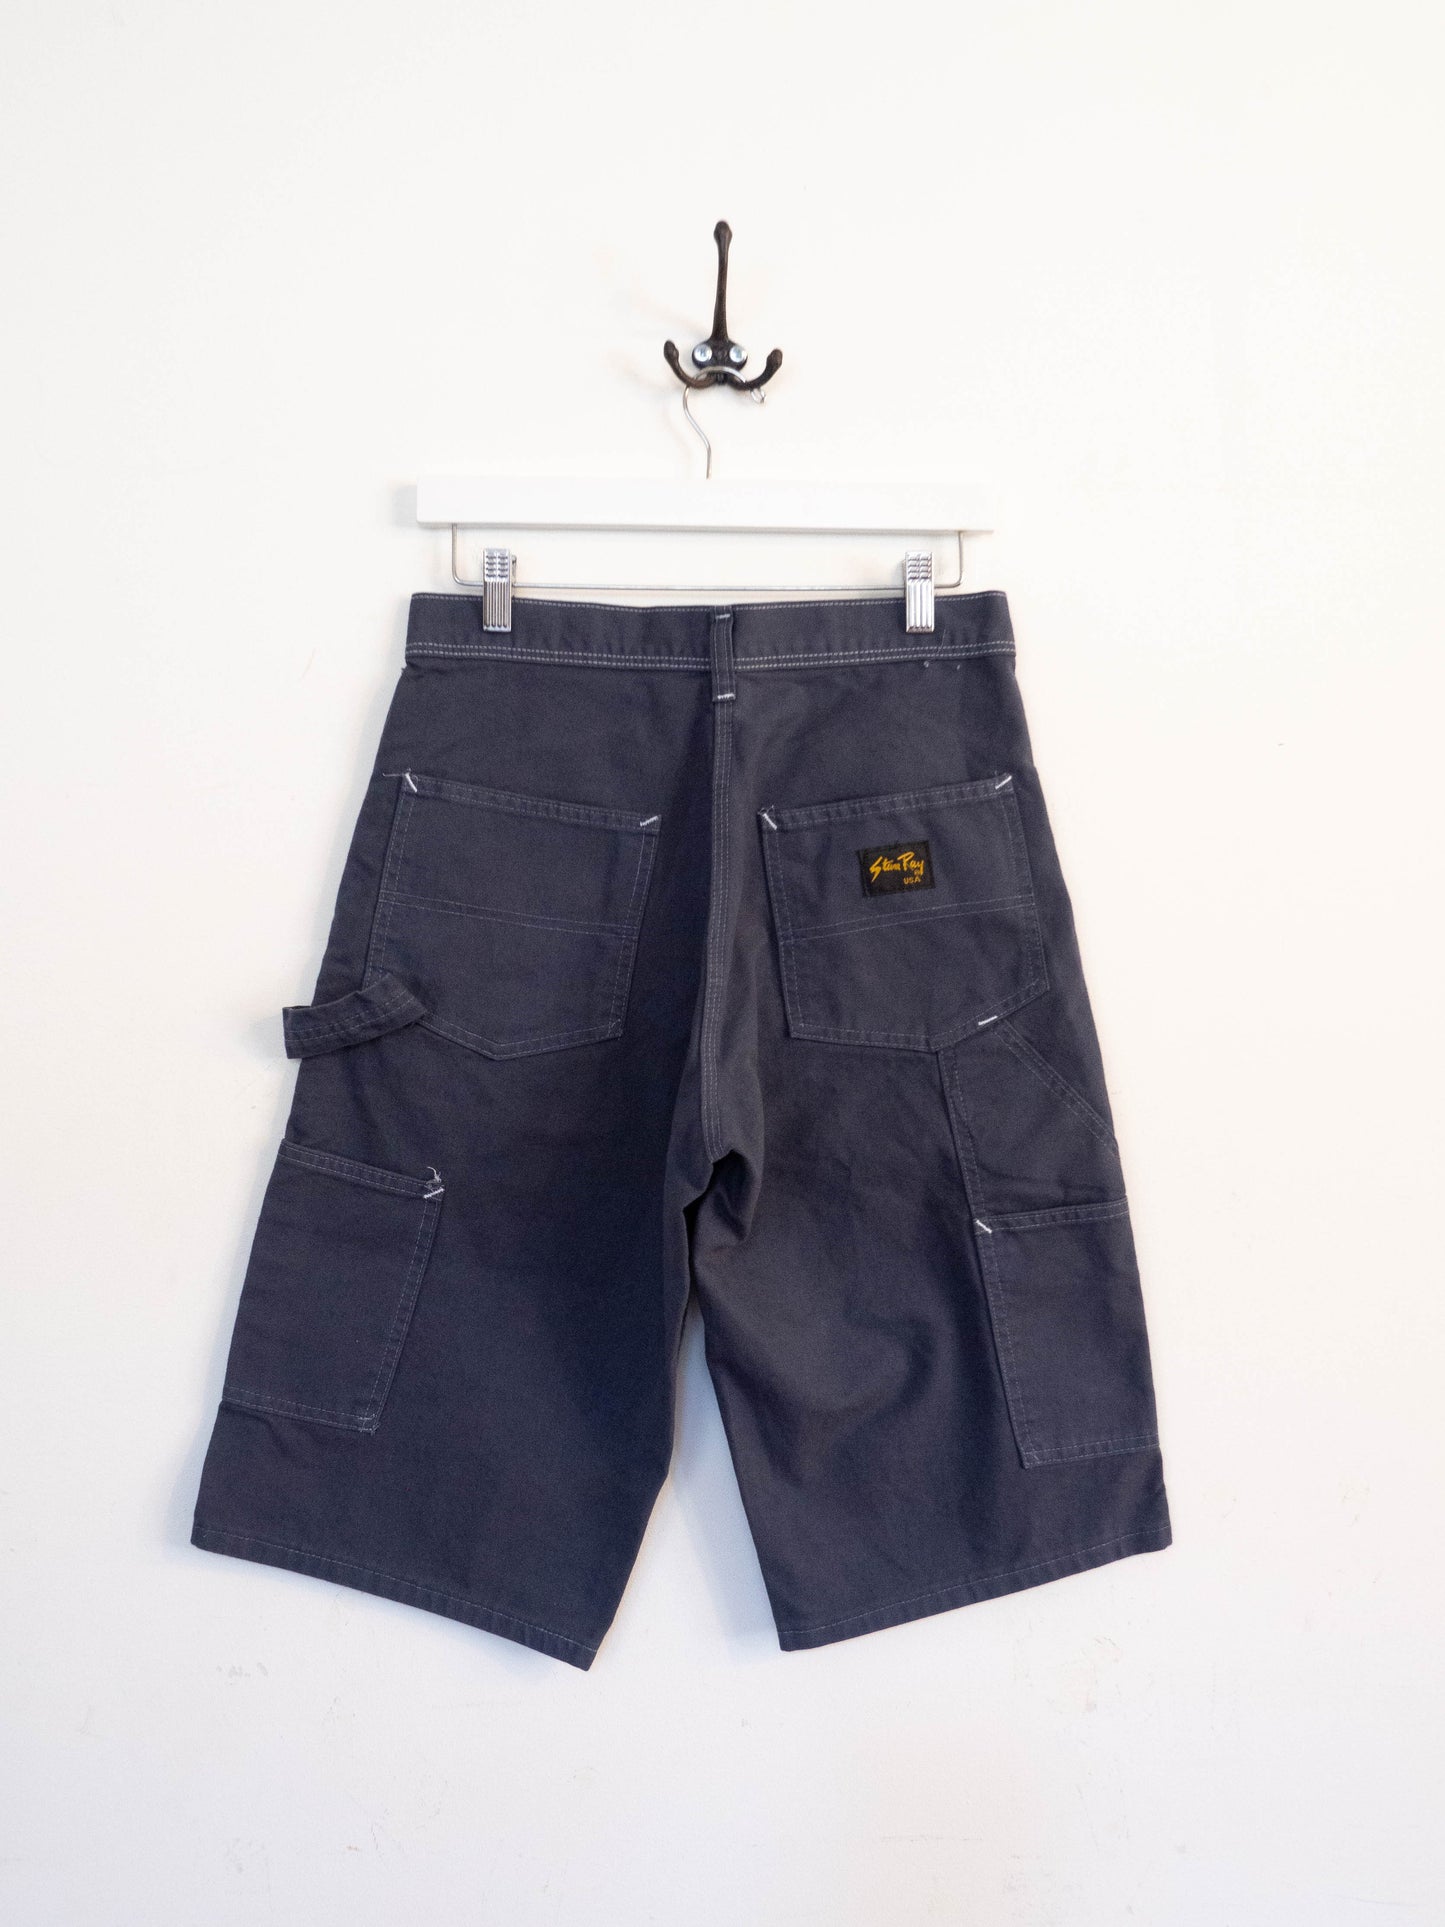 Vintage Stan Ray Shorts - Steel Gray